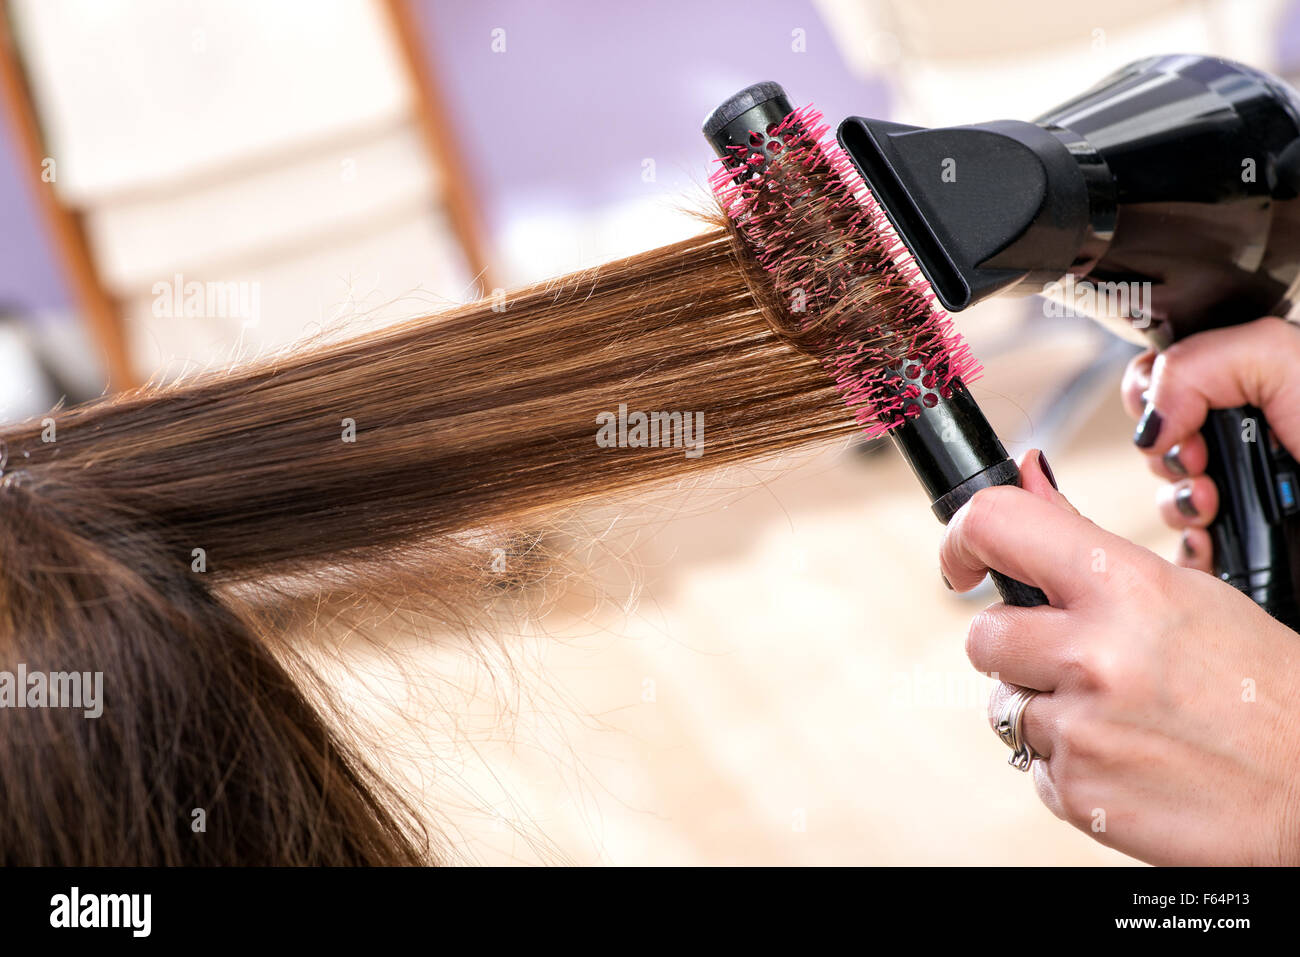 Hairdresser blow drying long brown hair using a round brush to introduce  lift and volume to the hair Stock Photo - Alamy